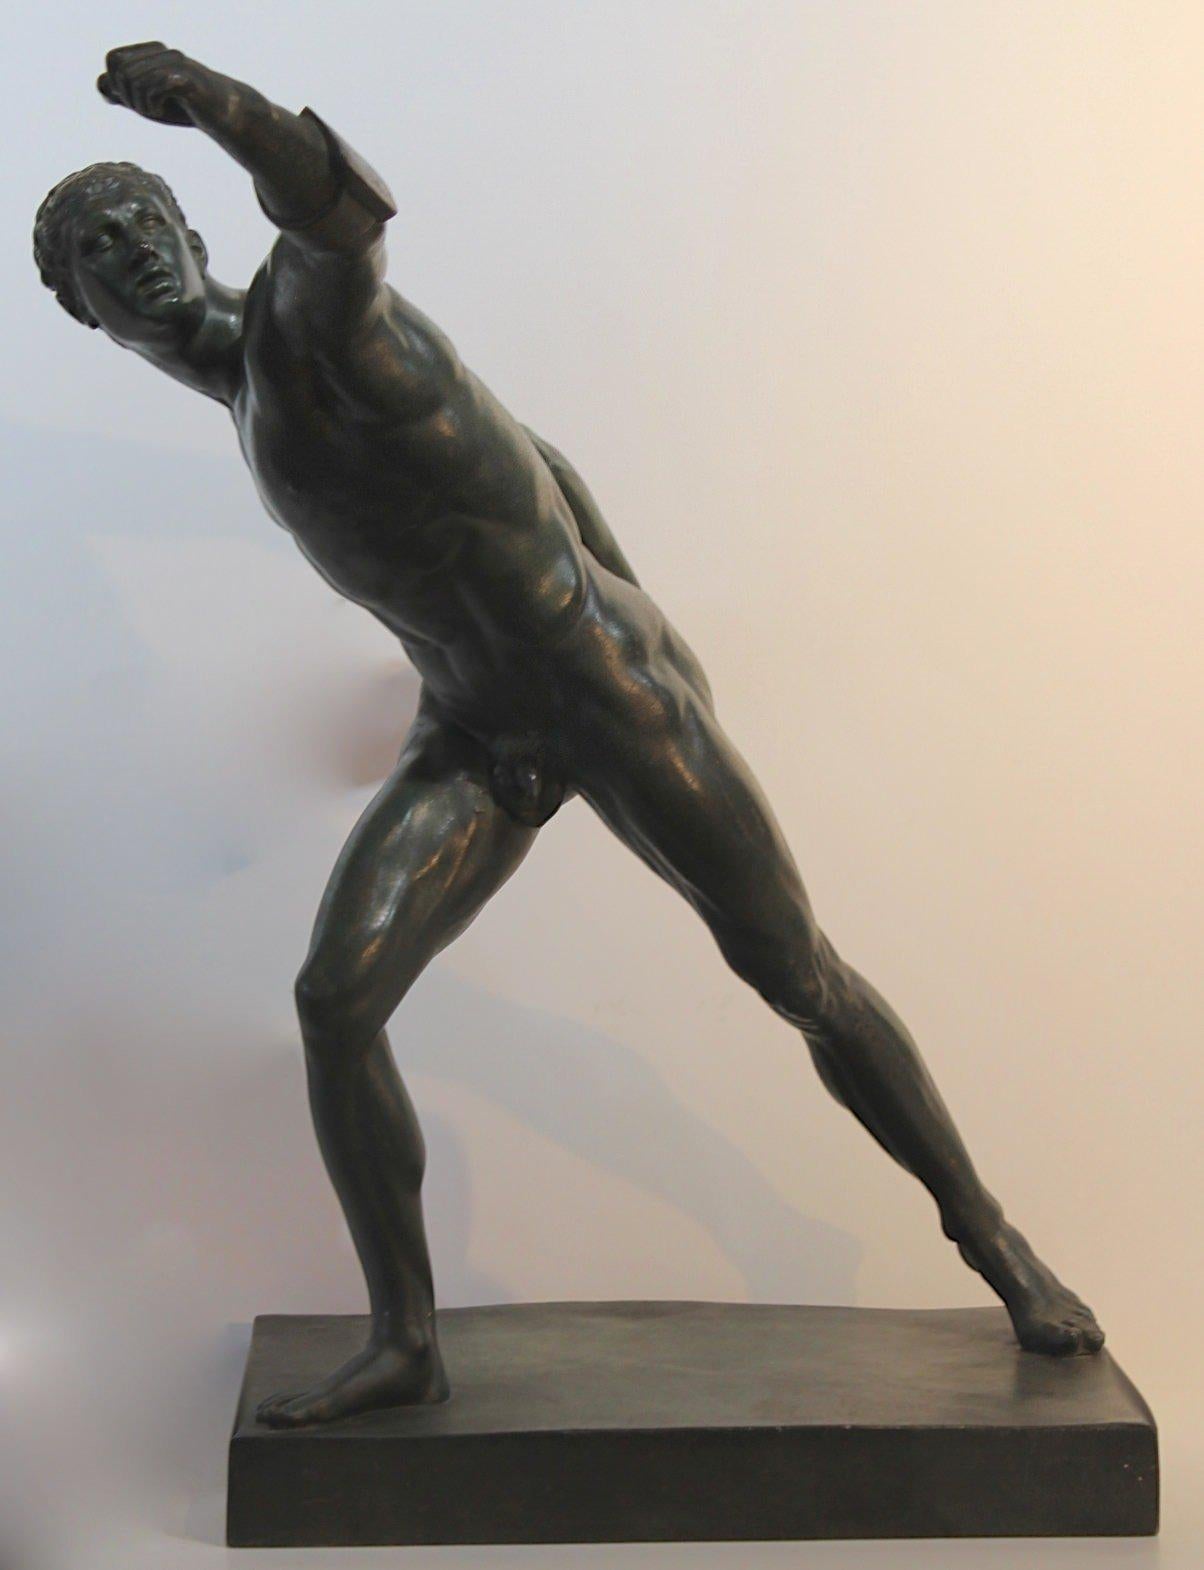 Early 19th Century Italian School Bronze, The Borghese Gladiator, c. 1810 - Sculpture by Unknown